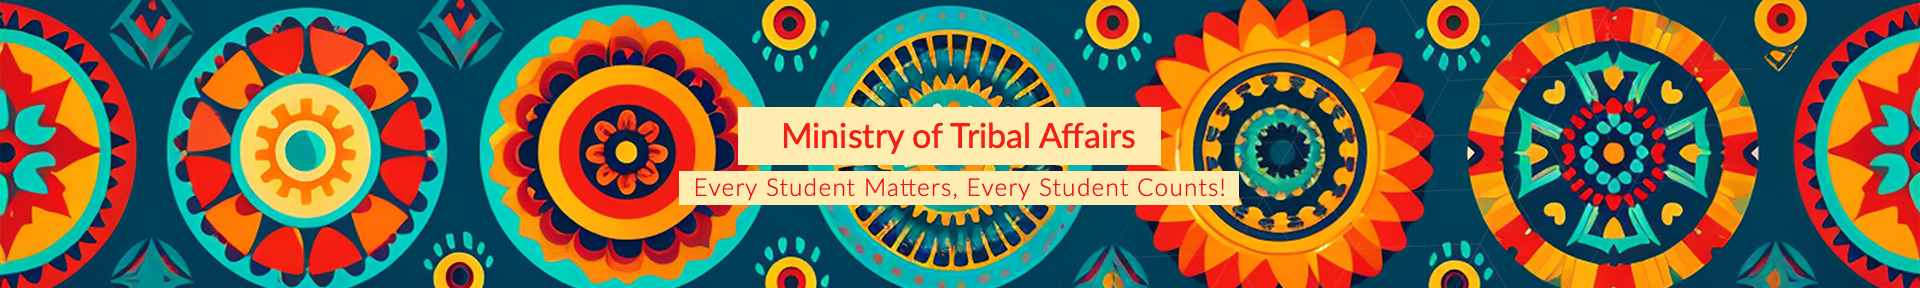 Ministry of Tribal